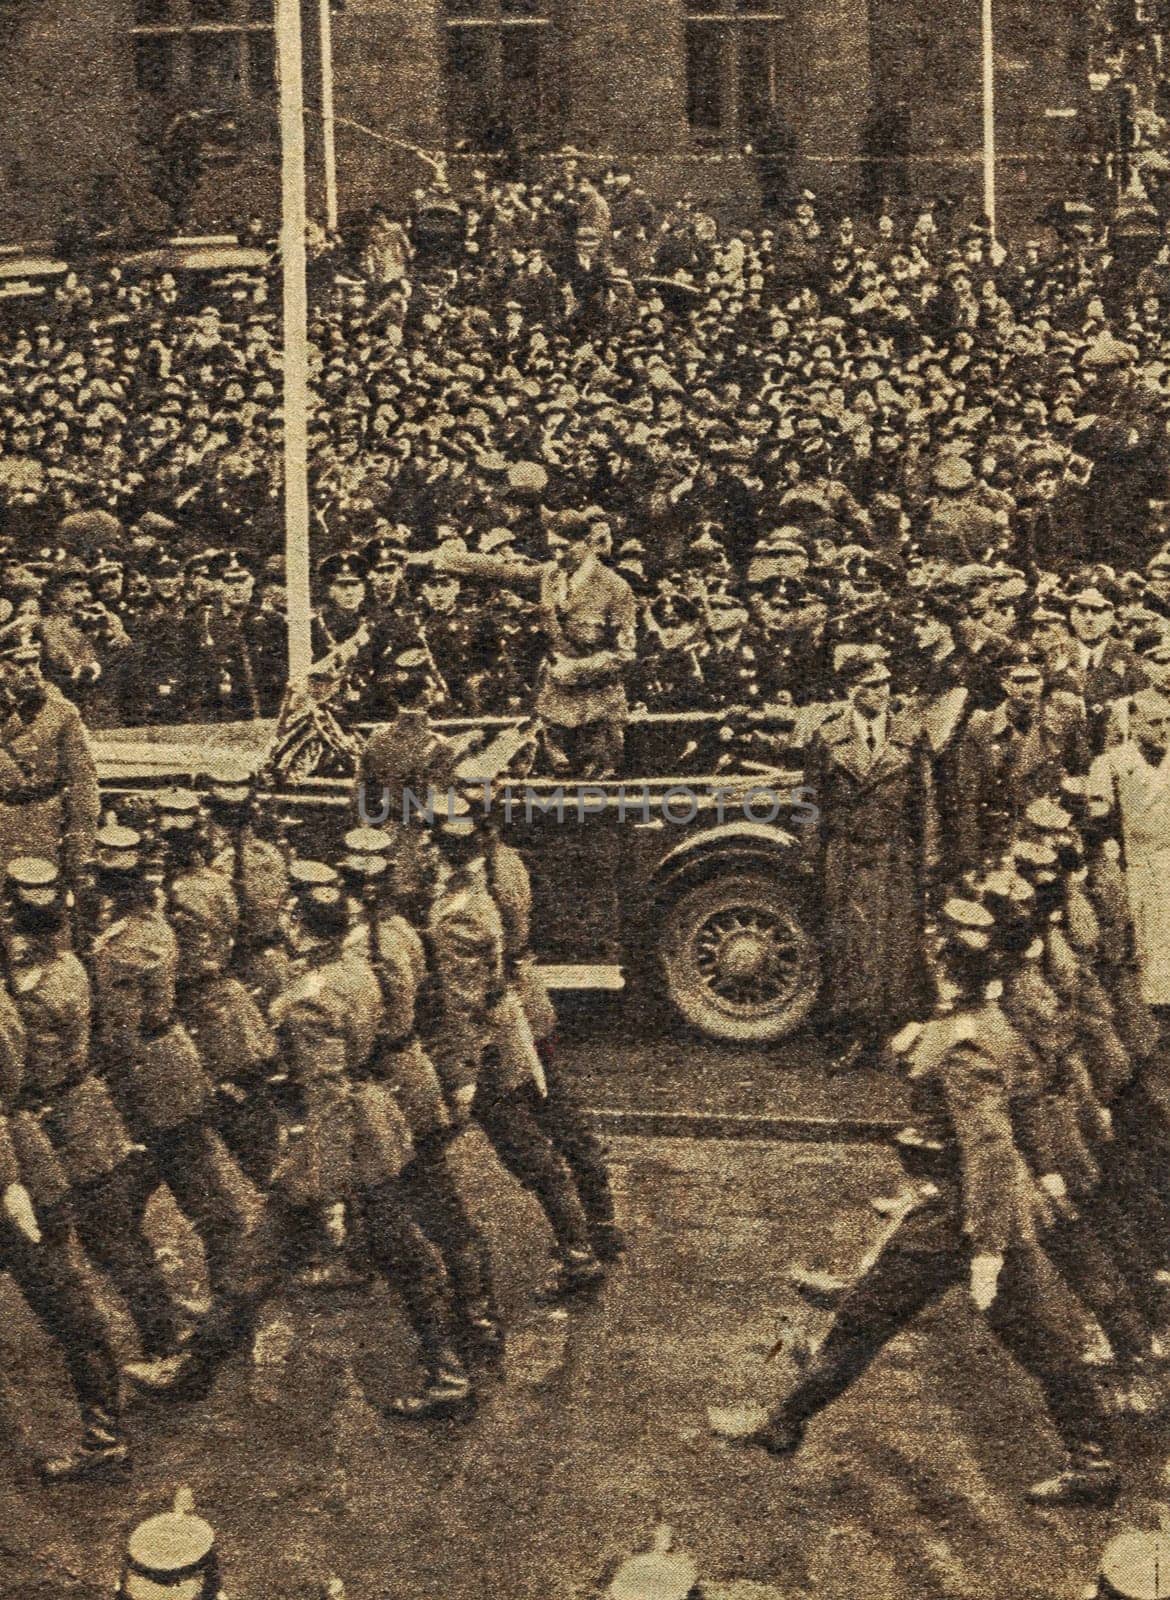 Adolf Hitler waving to crowds from his car at the head of a parade. Location is unidentified. Reproduction of antique photo. by roman_nerud